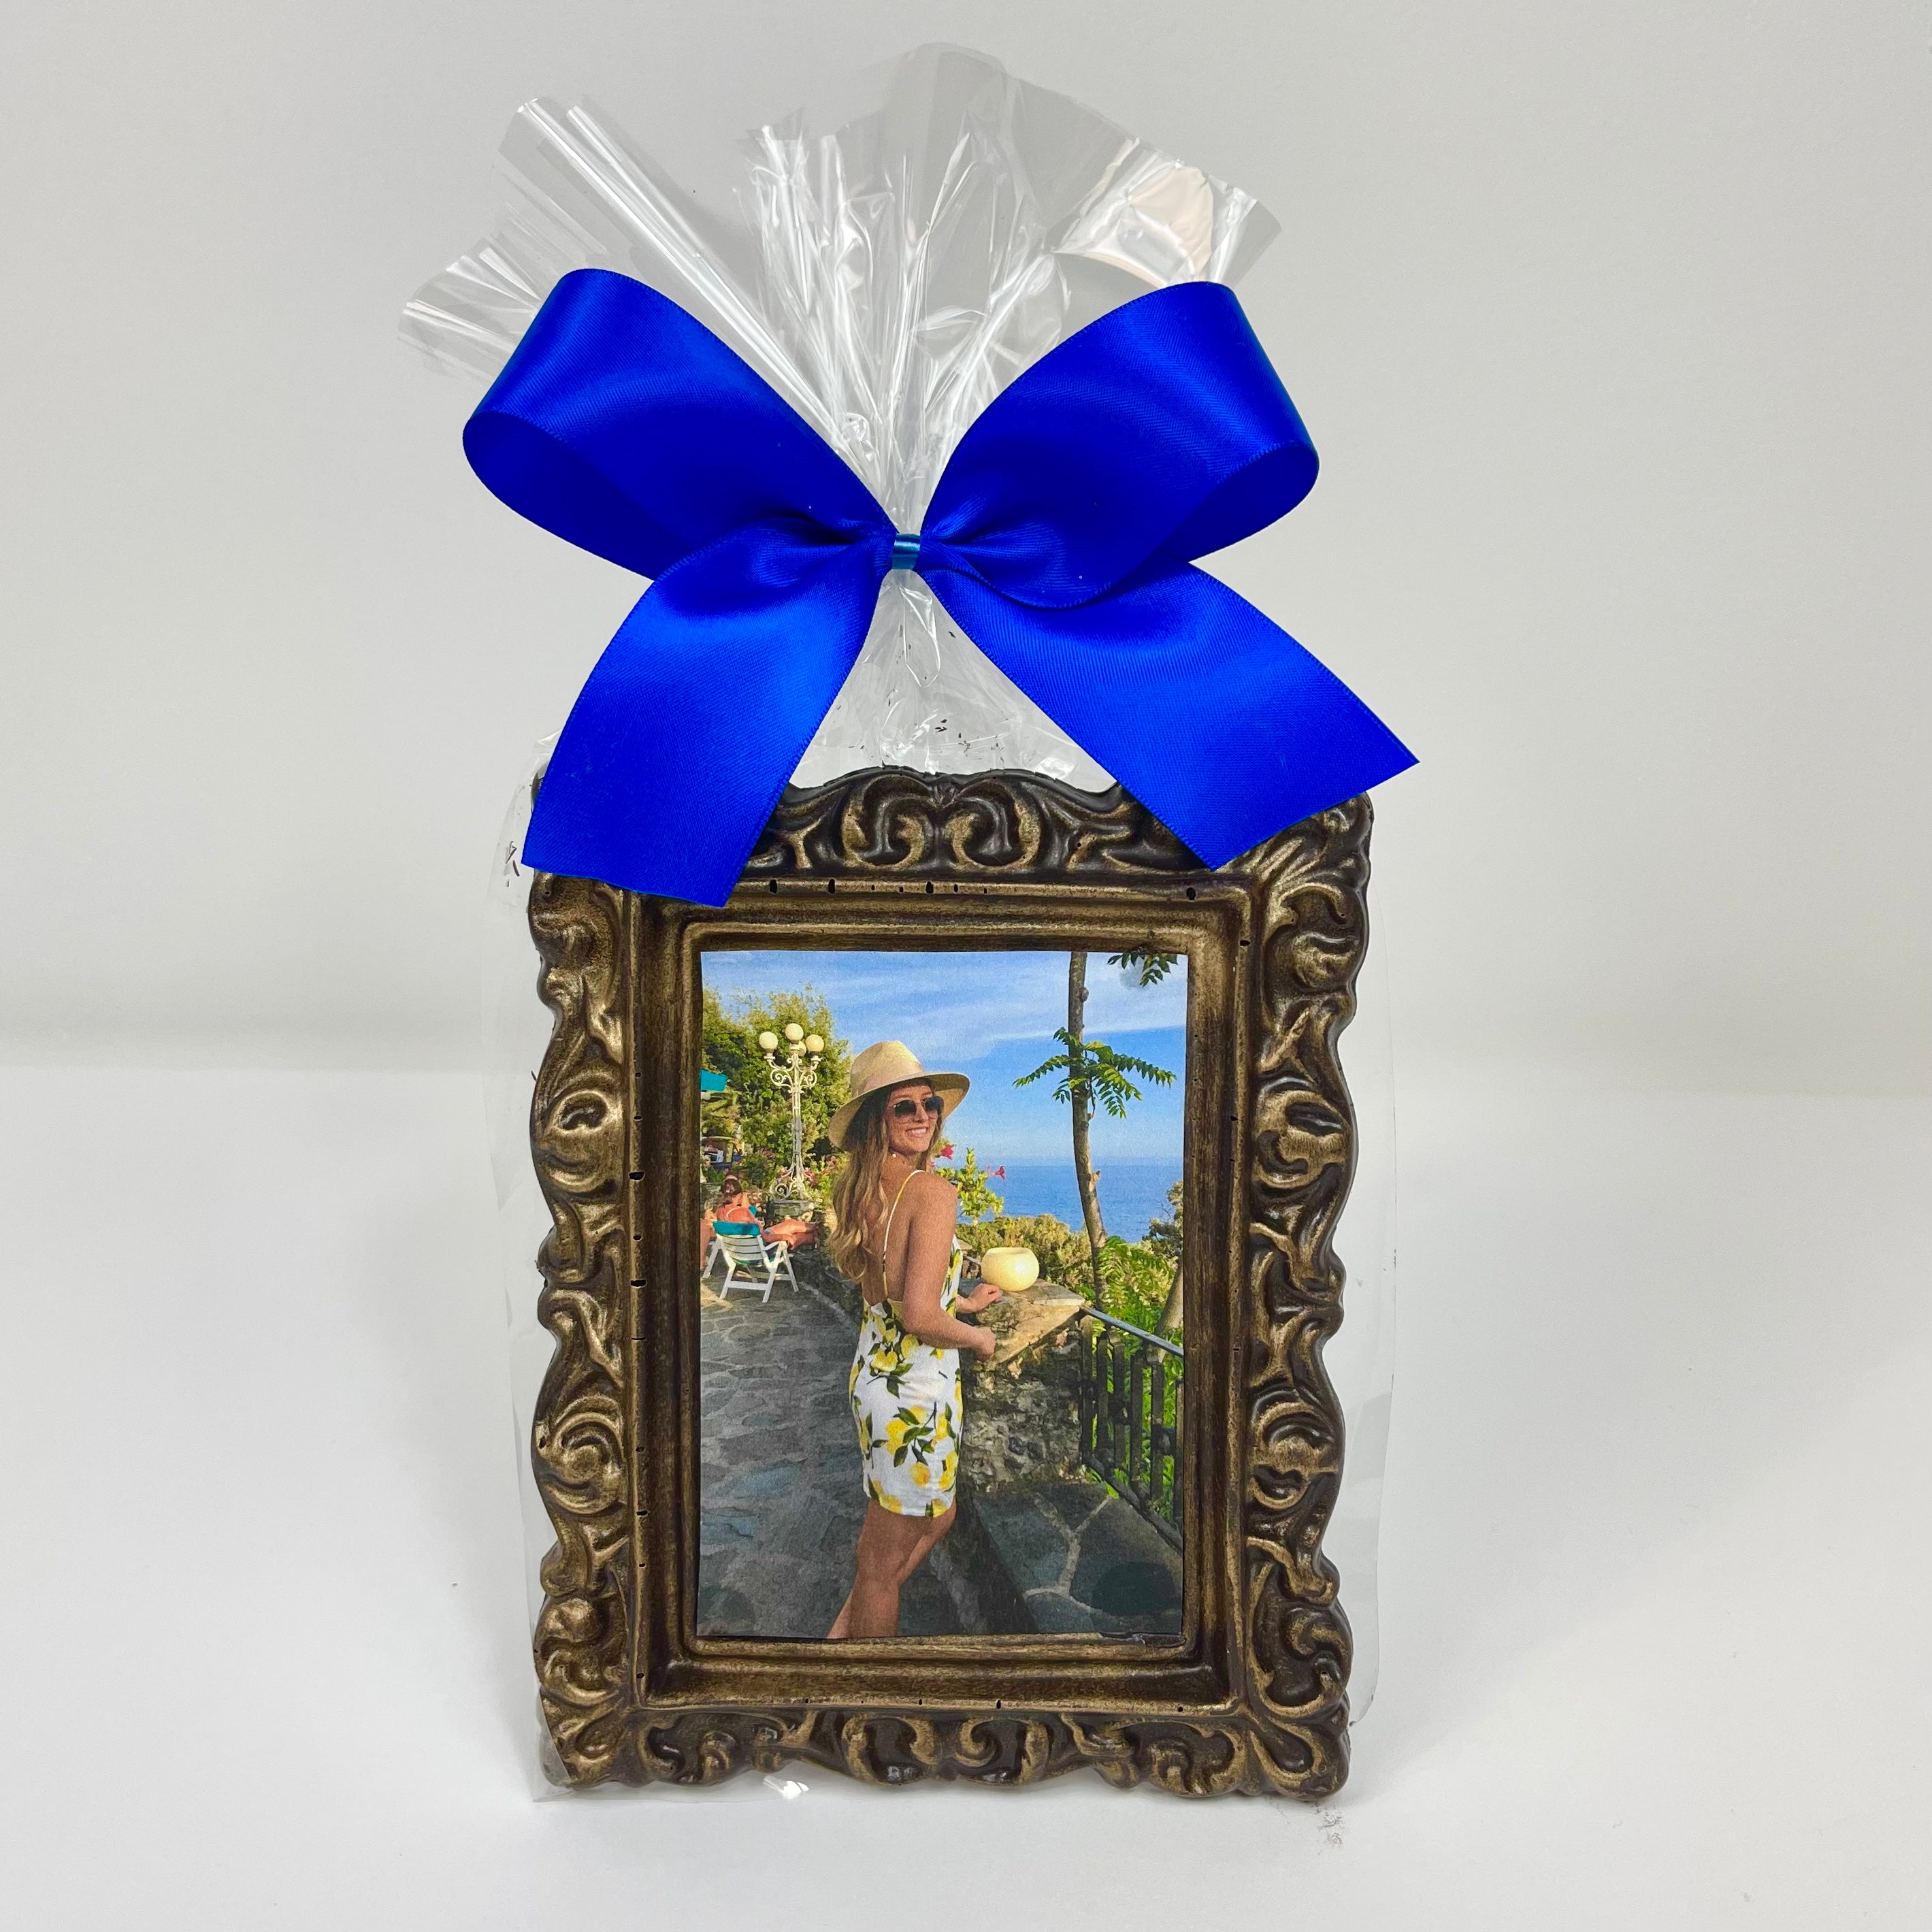 Large Dark Chocolate Edible Image Frame wrapped in cellophane with a ribbon